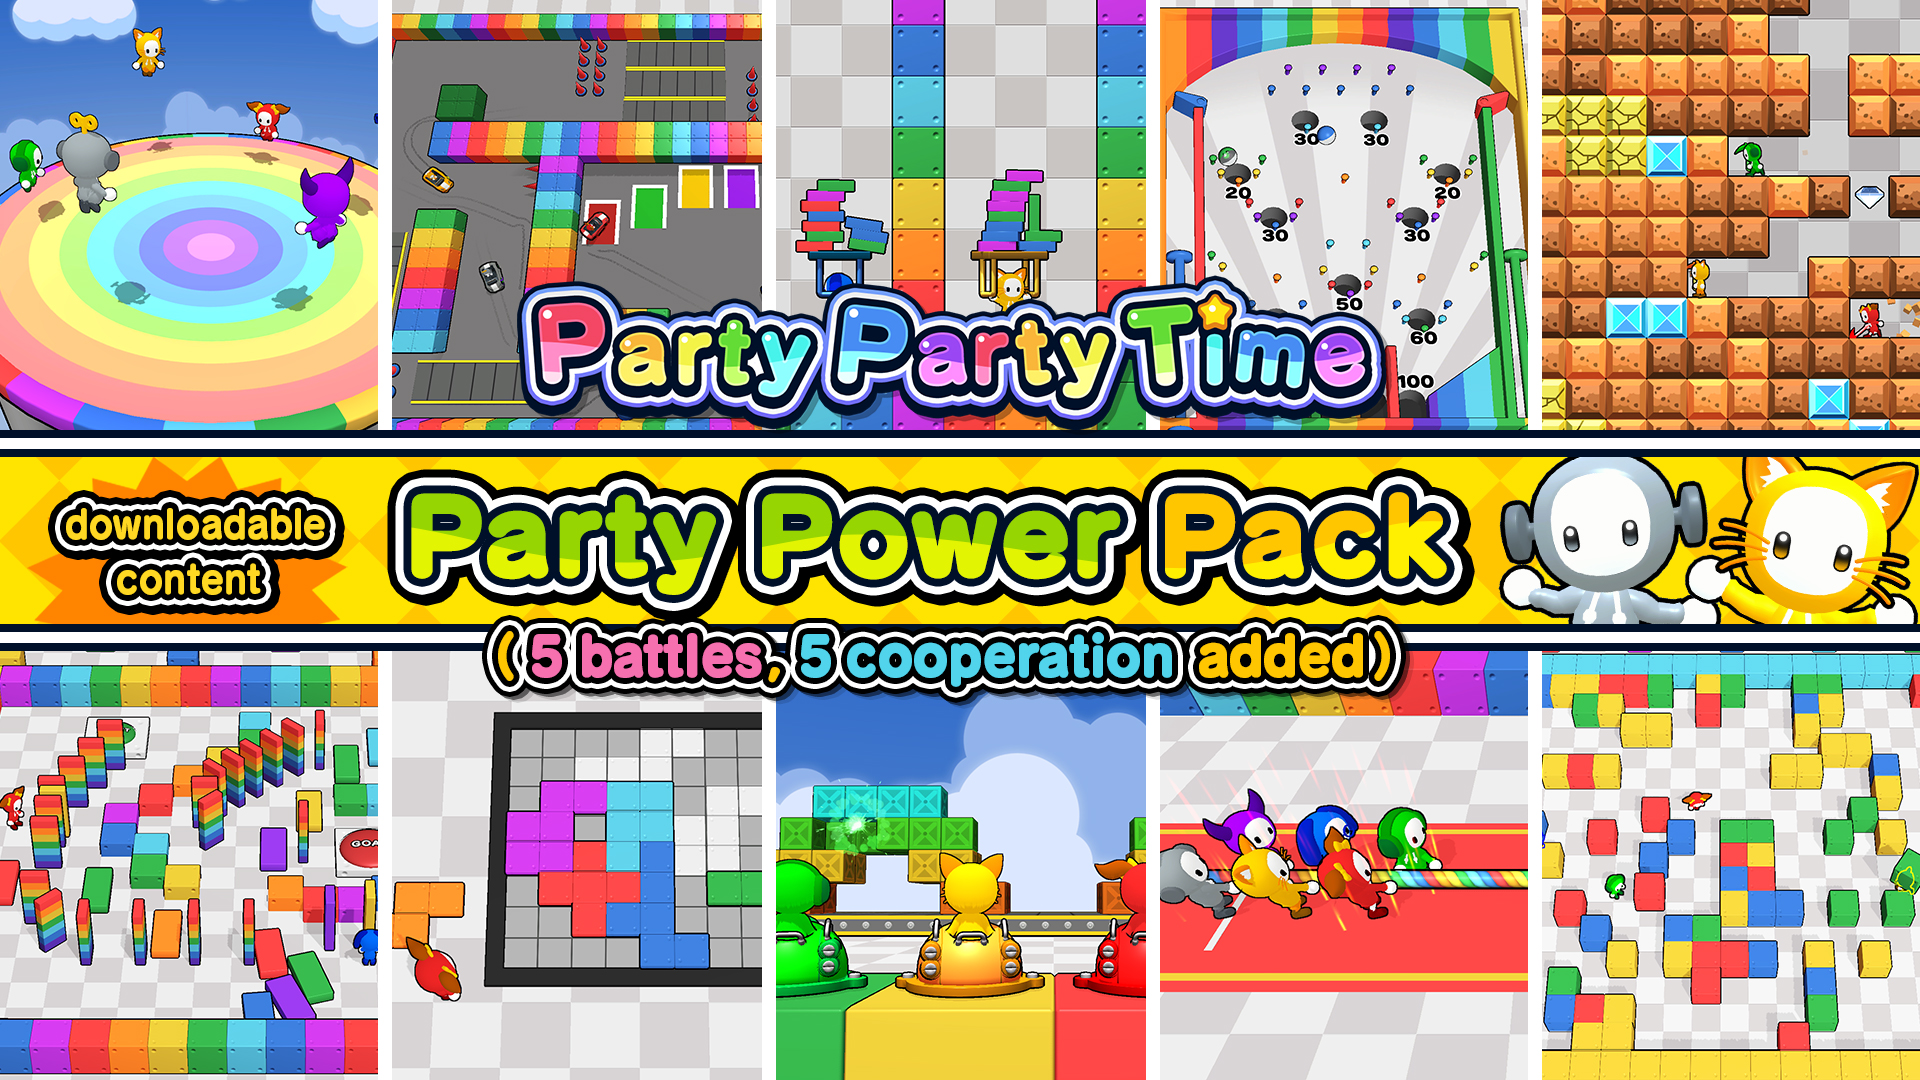 Party Power Pack